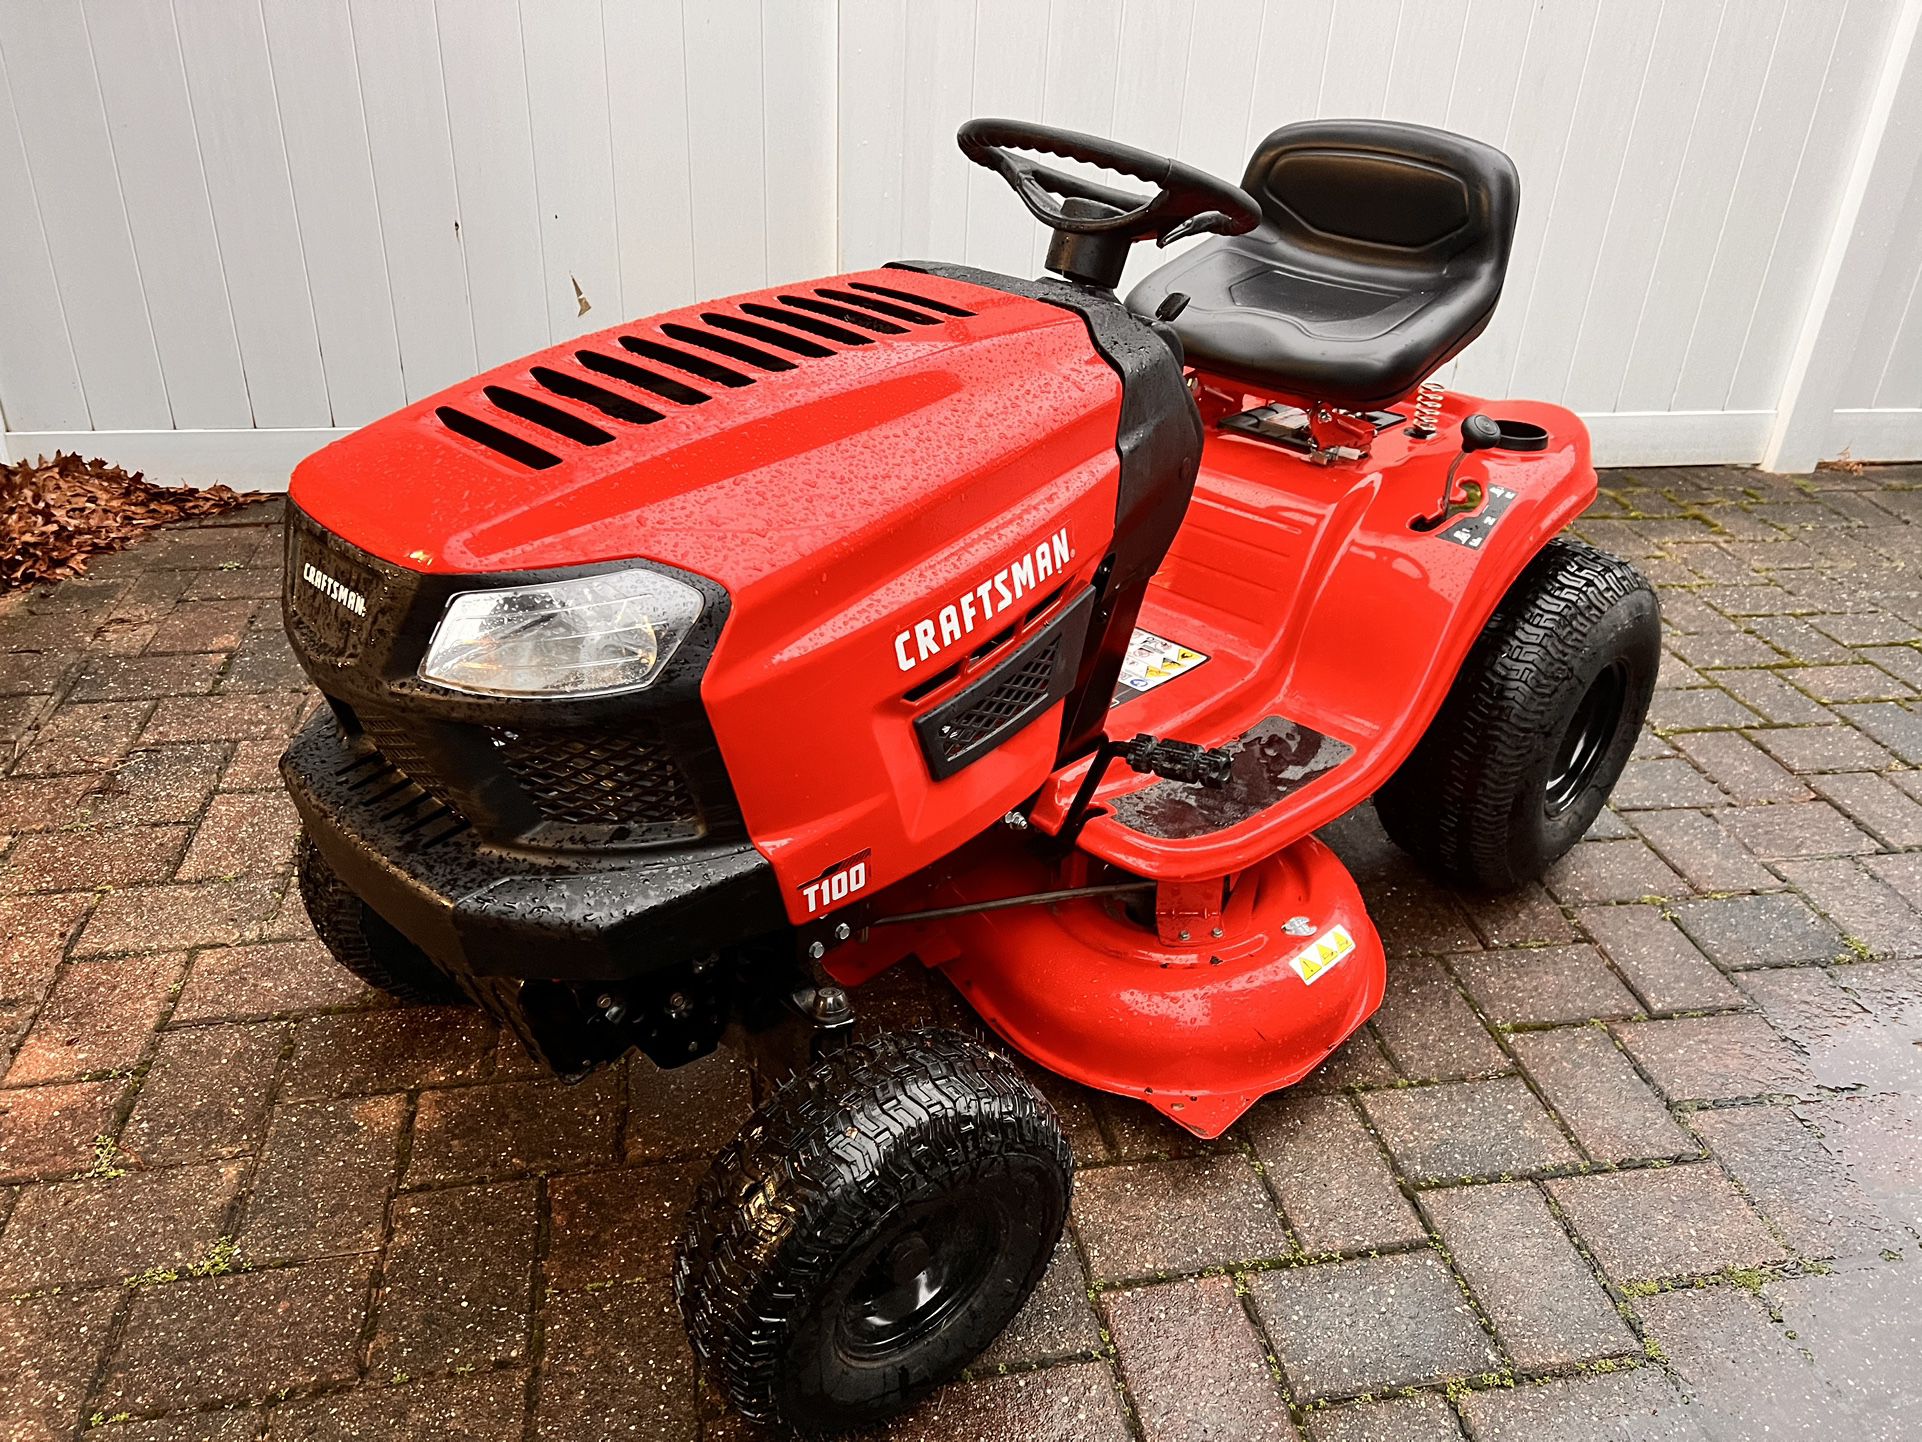 Craftsman Lawn Tractor 36” Like New with BRAND NEW Bagger!